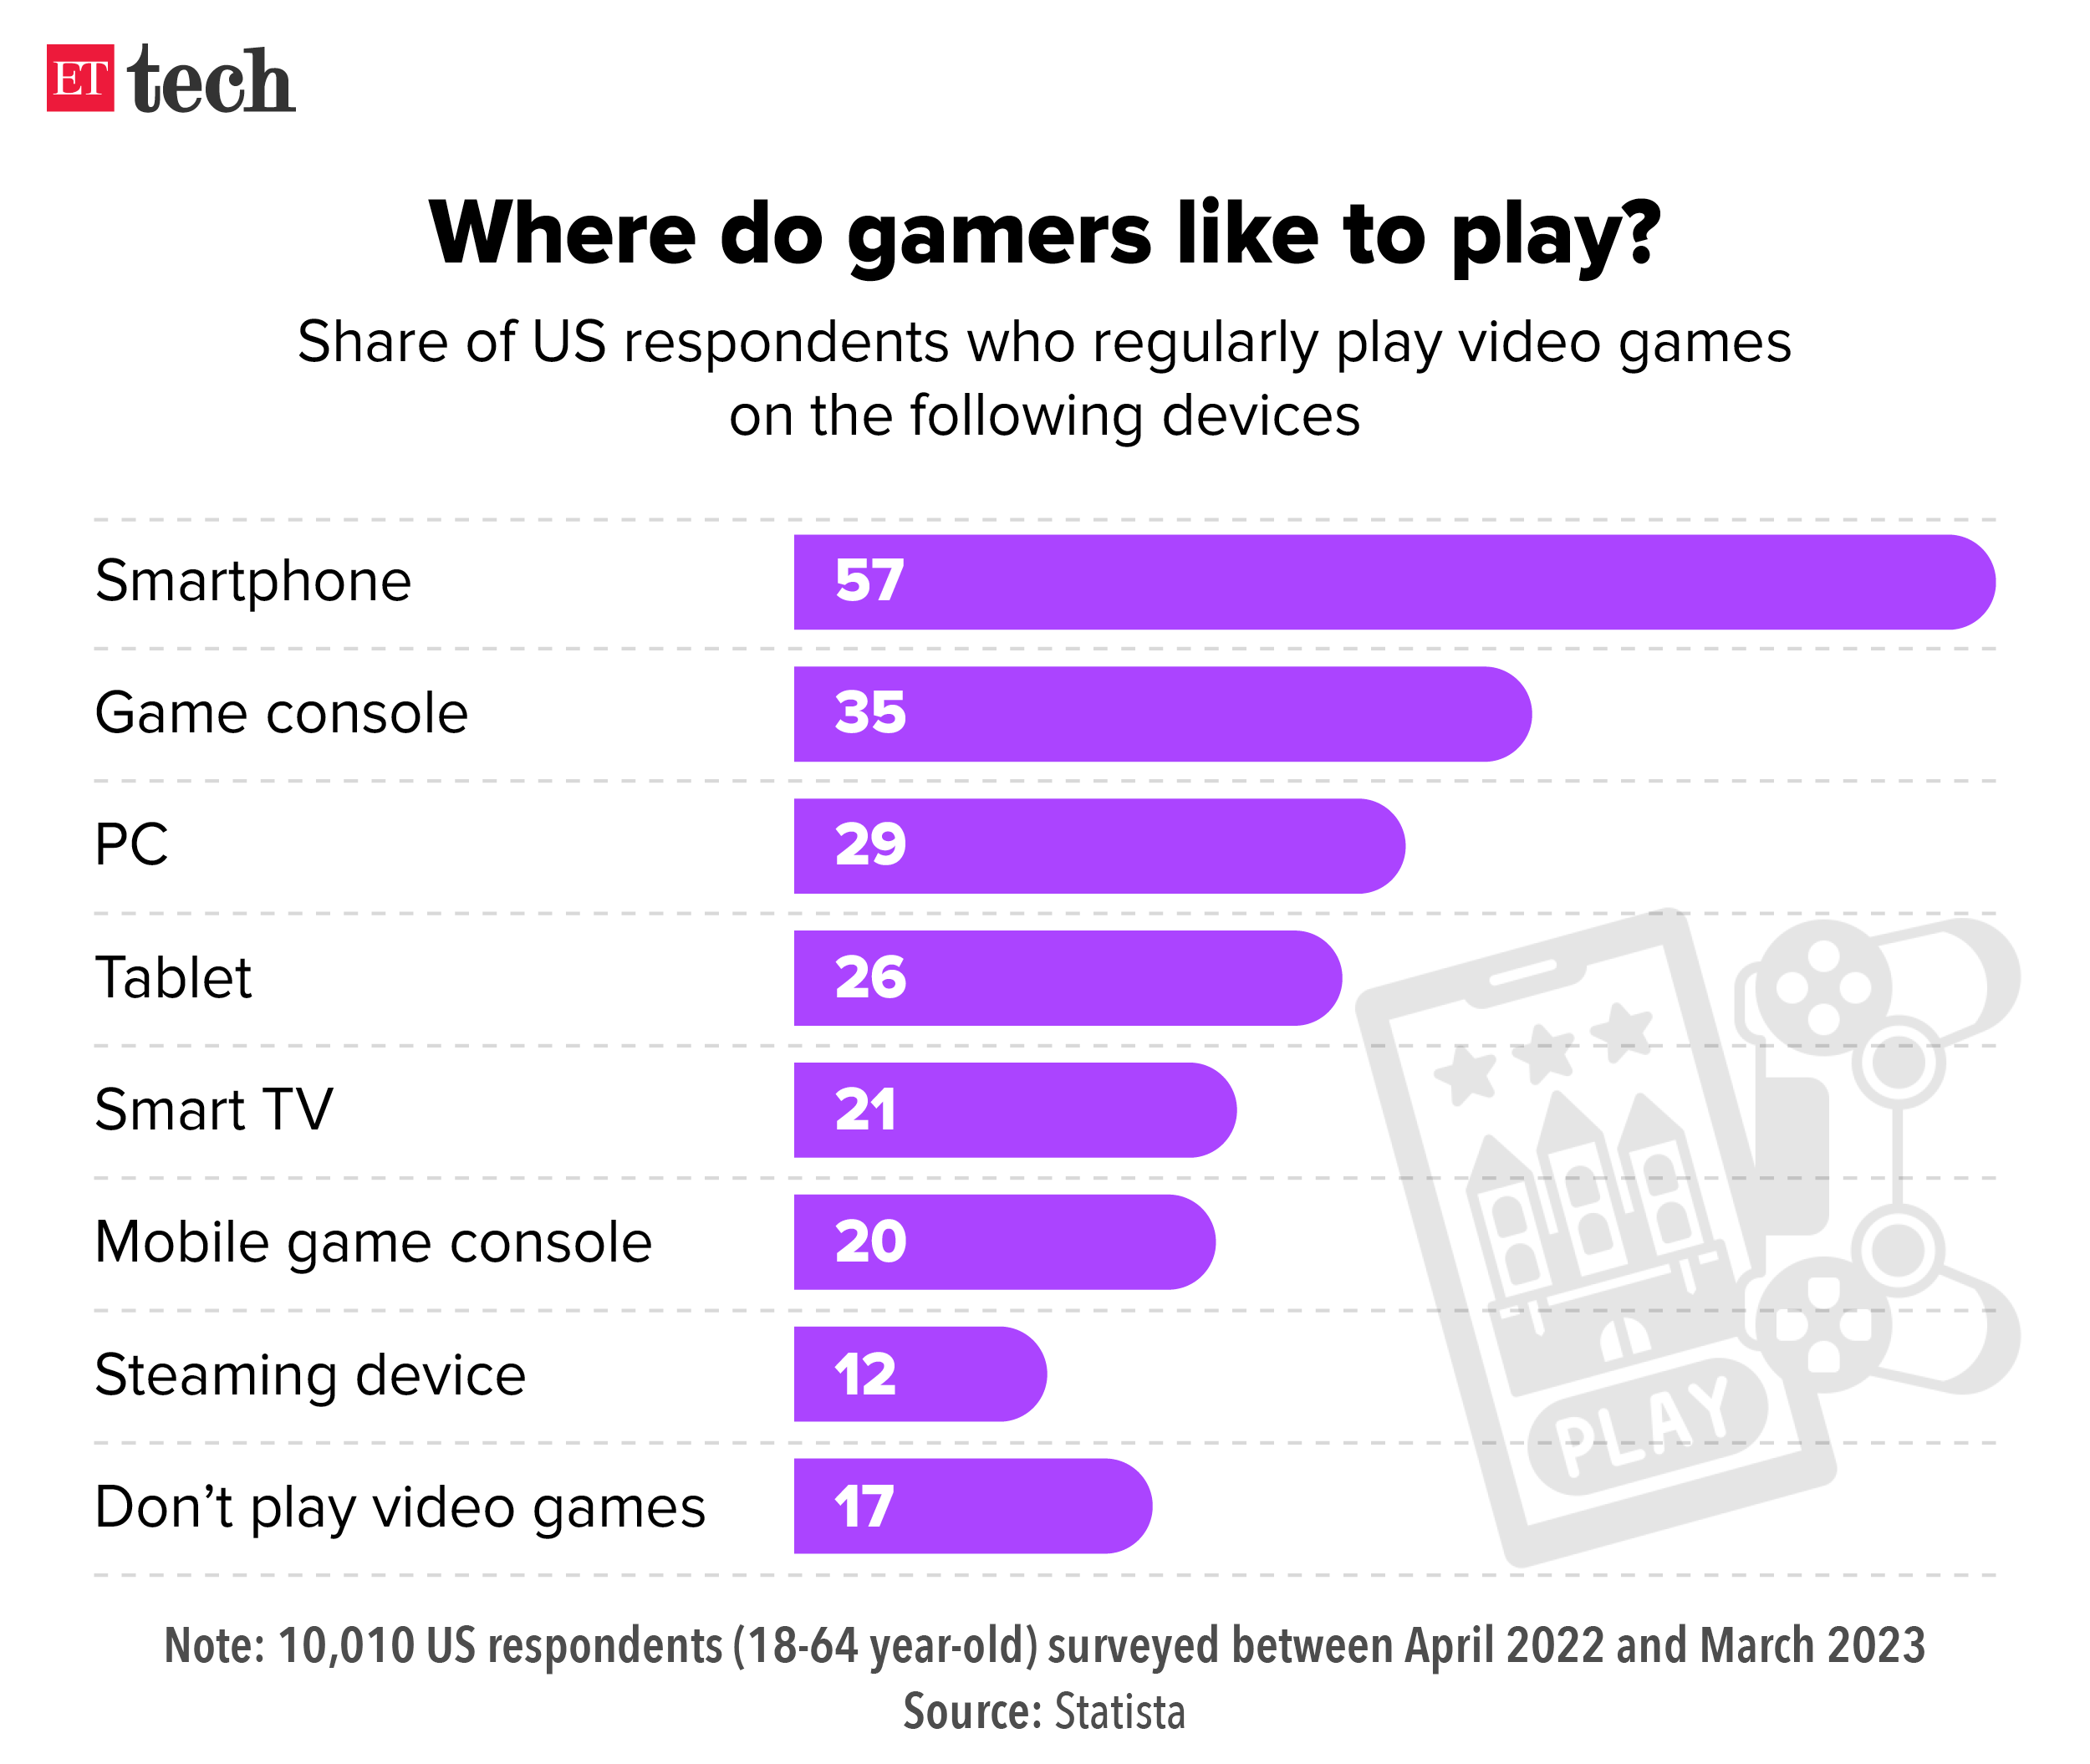 Where do gamers like to play